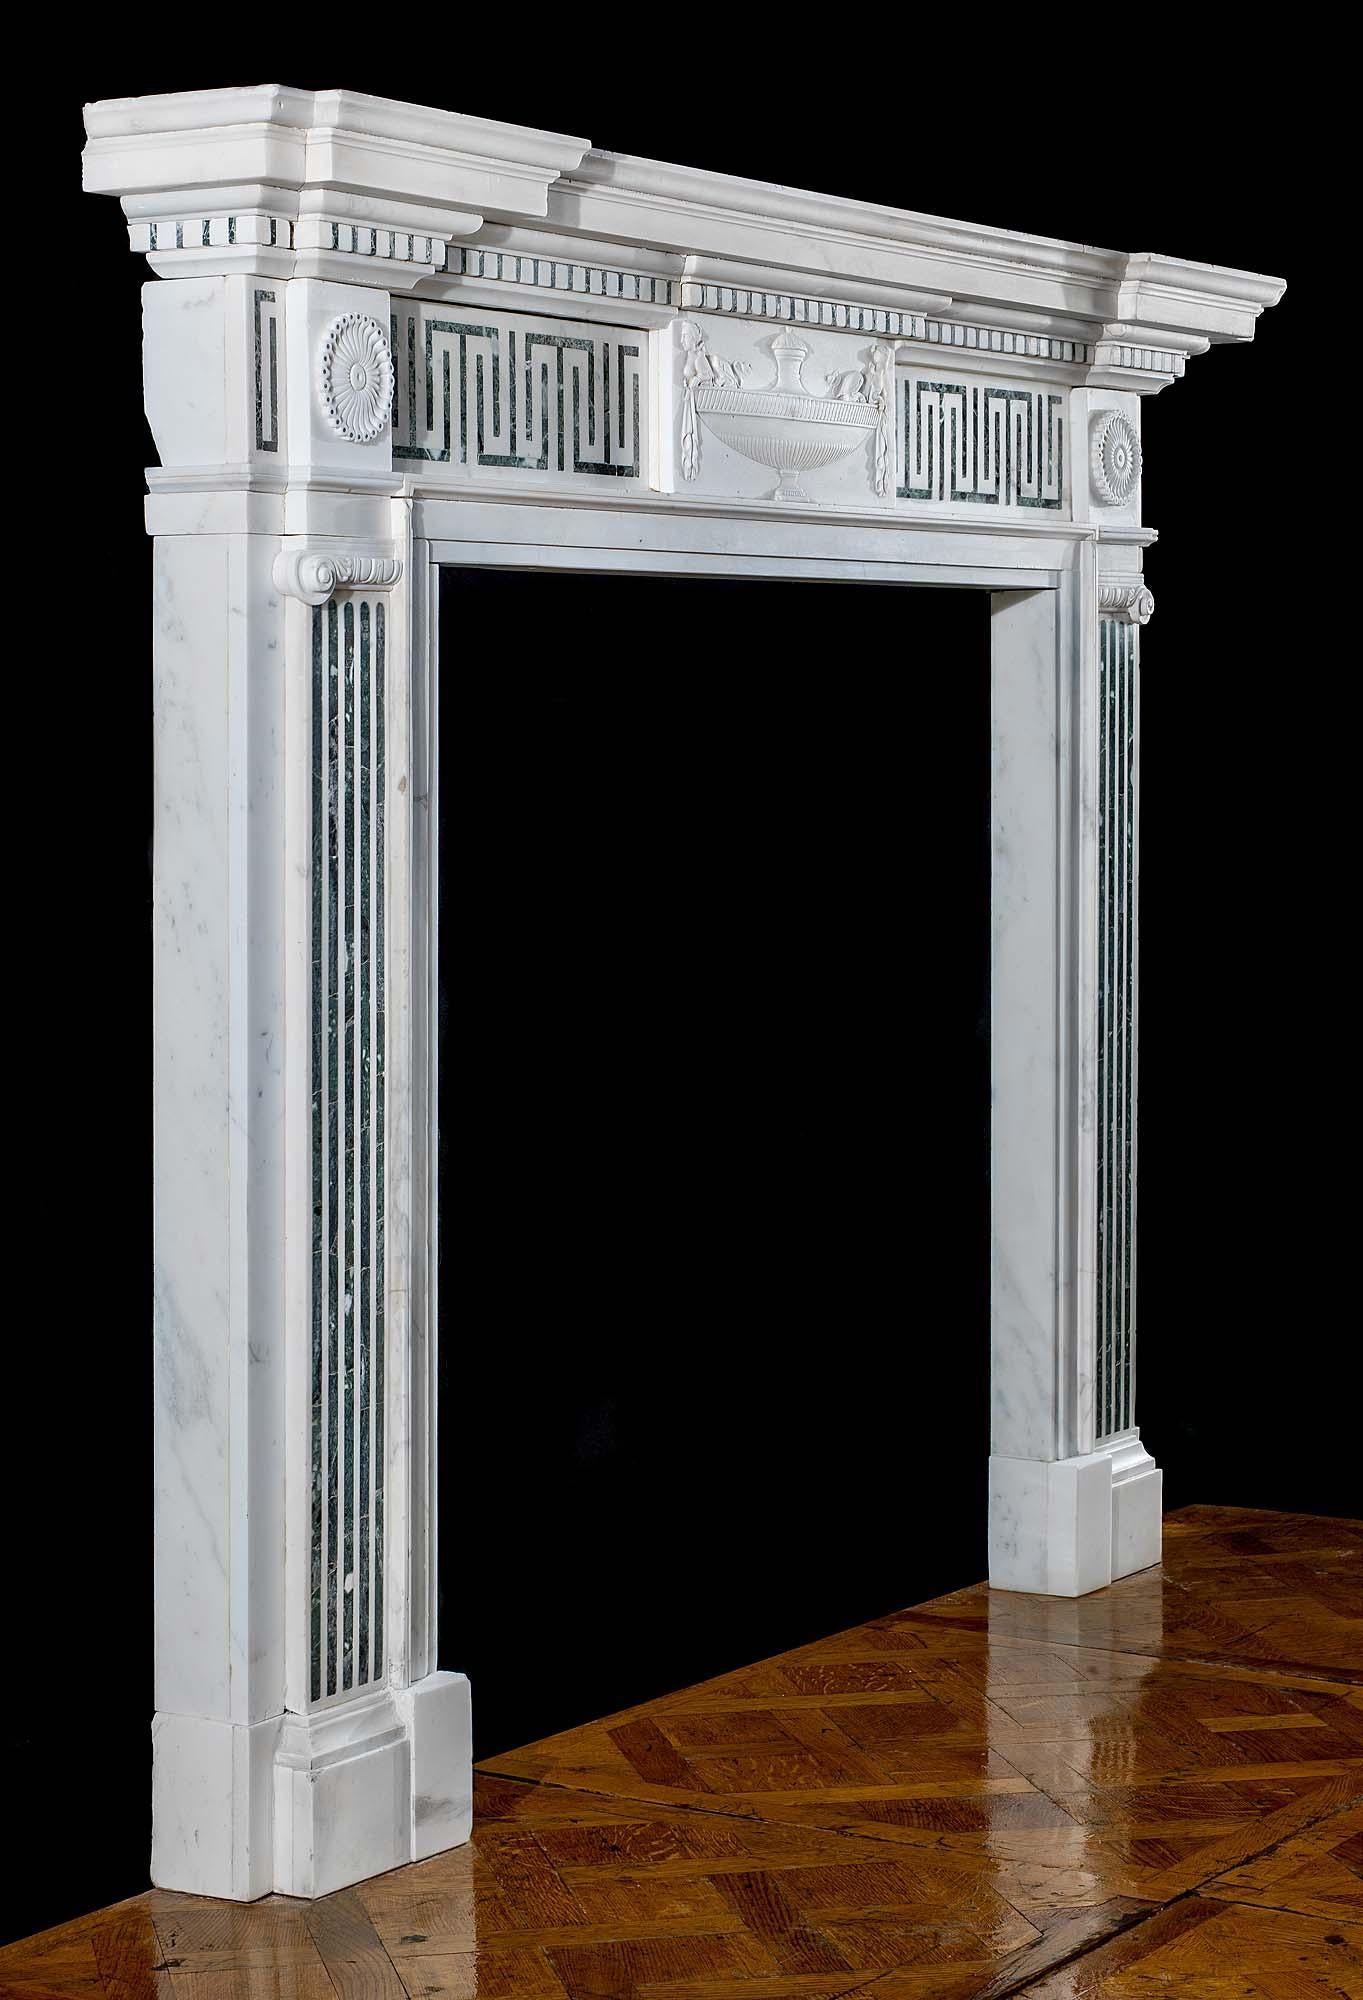 A fine statuary marble Victorian chimneypiece with grey/green Verde Antico Marble inlay very much in the George III manner. The wide moulded shelf, with an underlay of dentil detail, rests above an inlaid Greek Key frieze with a central tablet of an